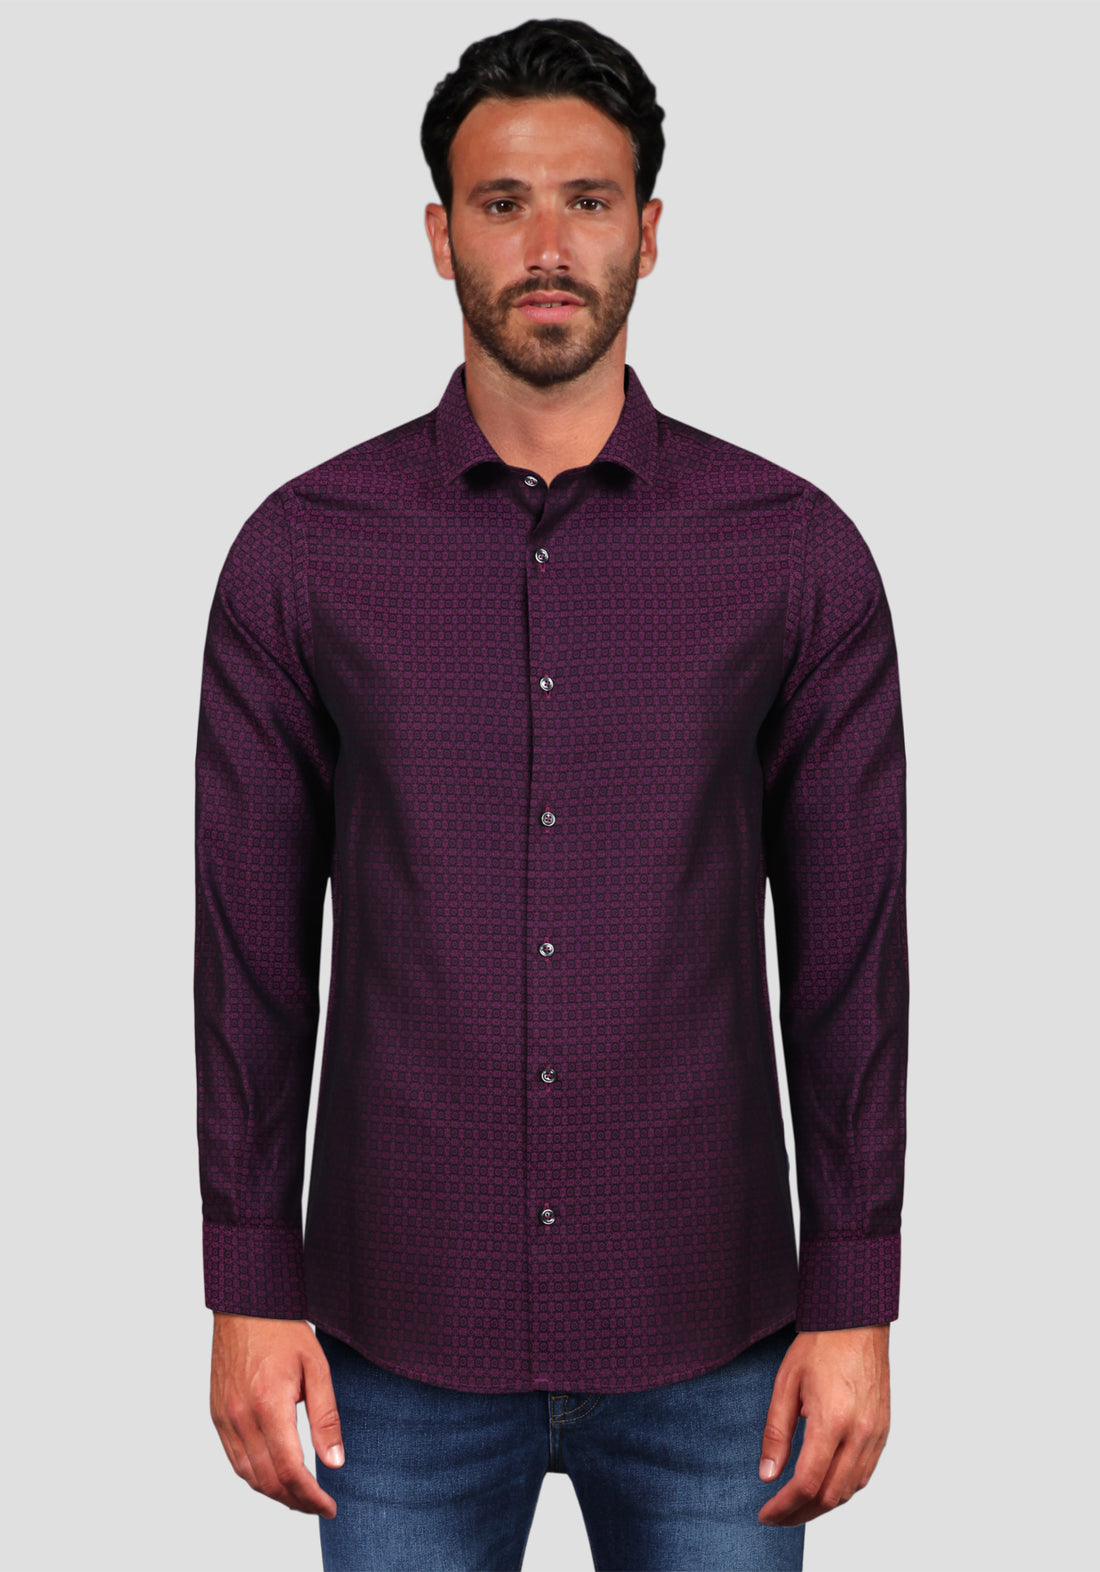 Slim Fit Shirt with French Collar and Micro Print - Wine Red -